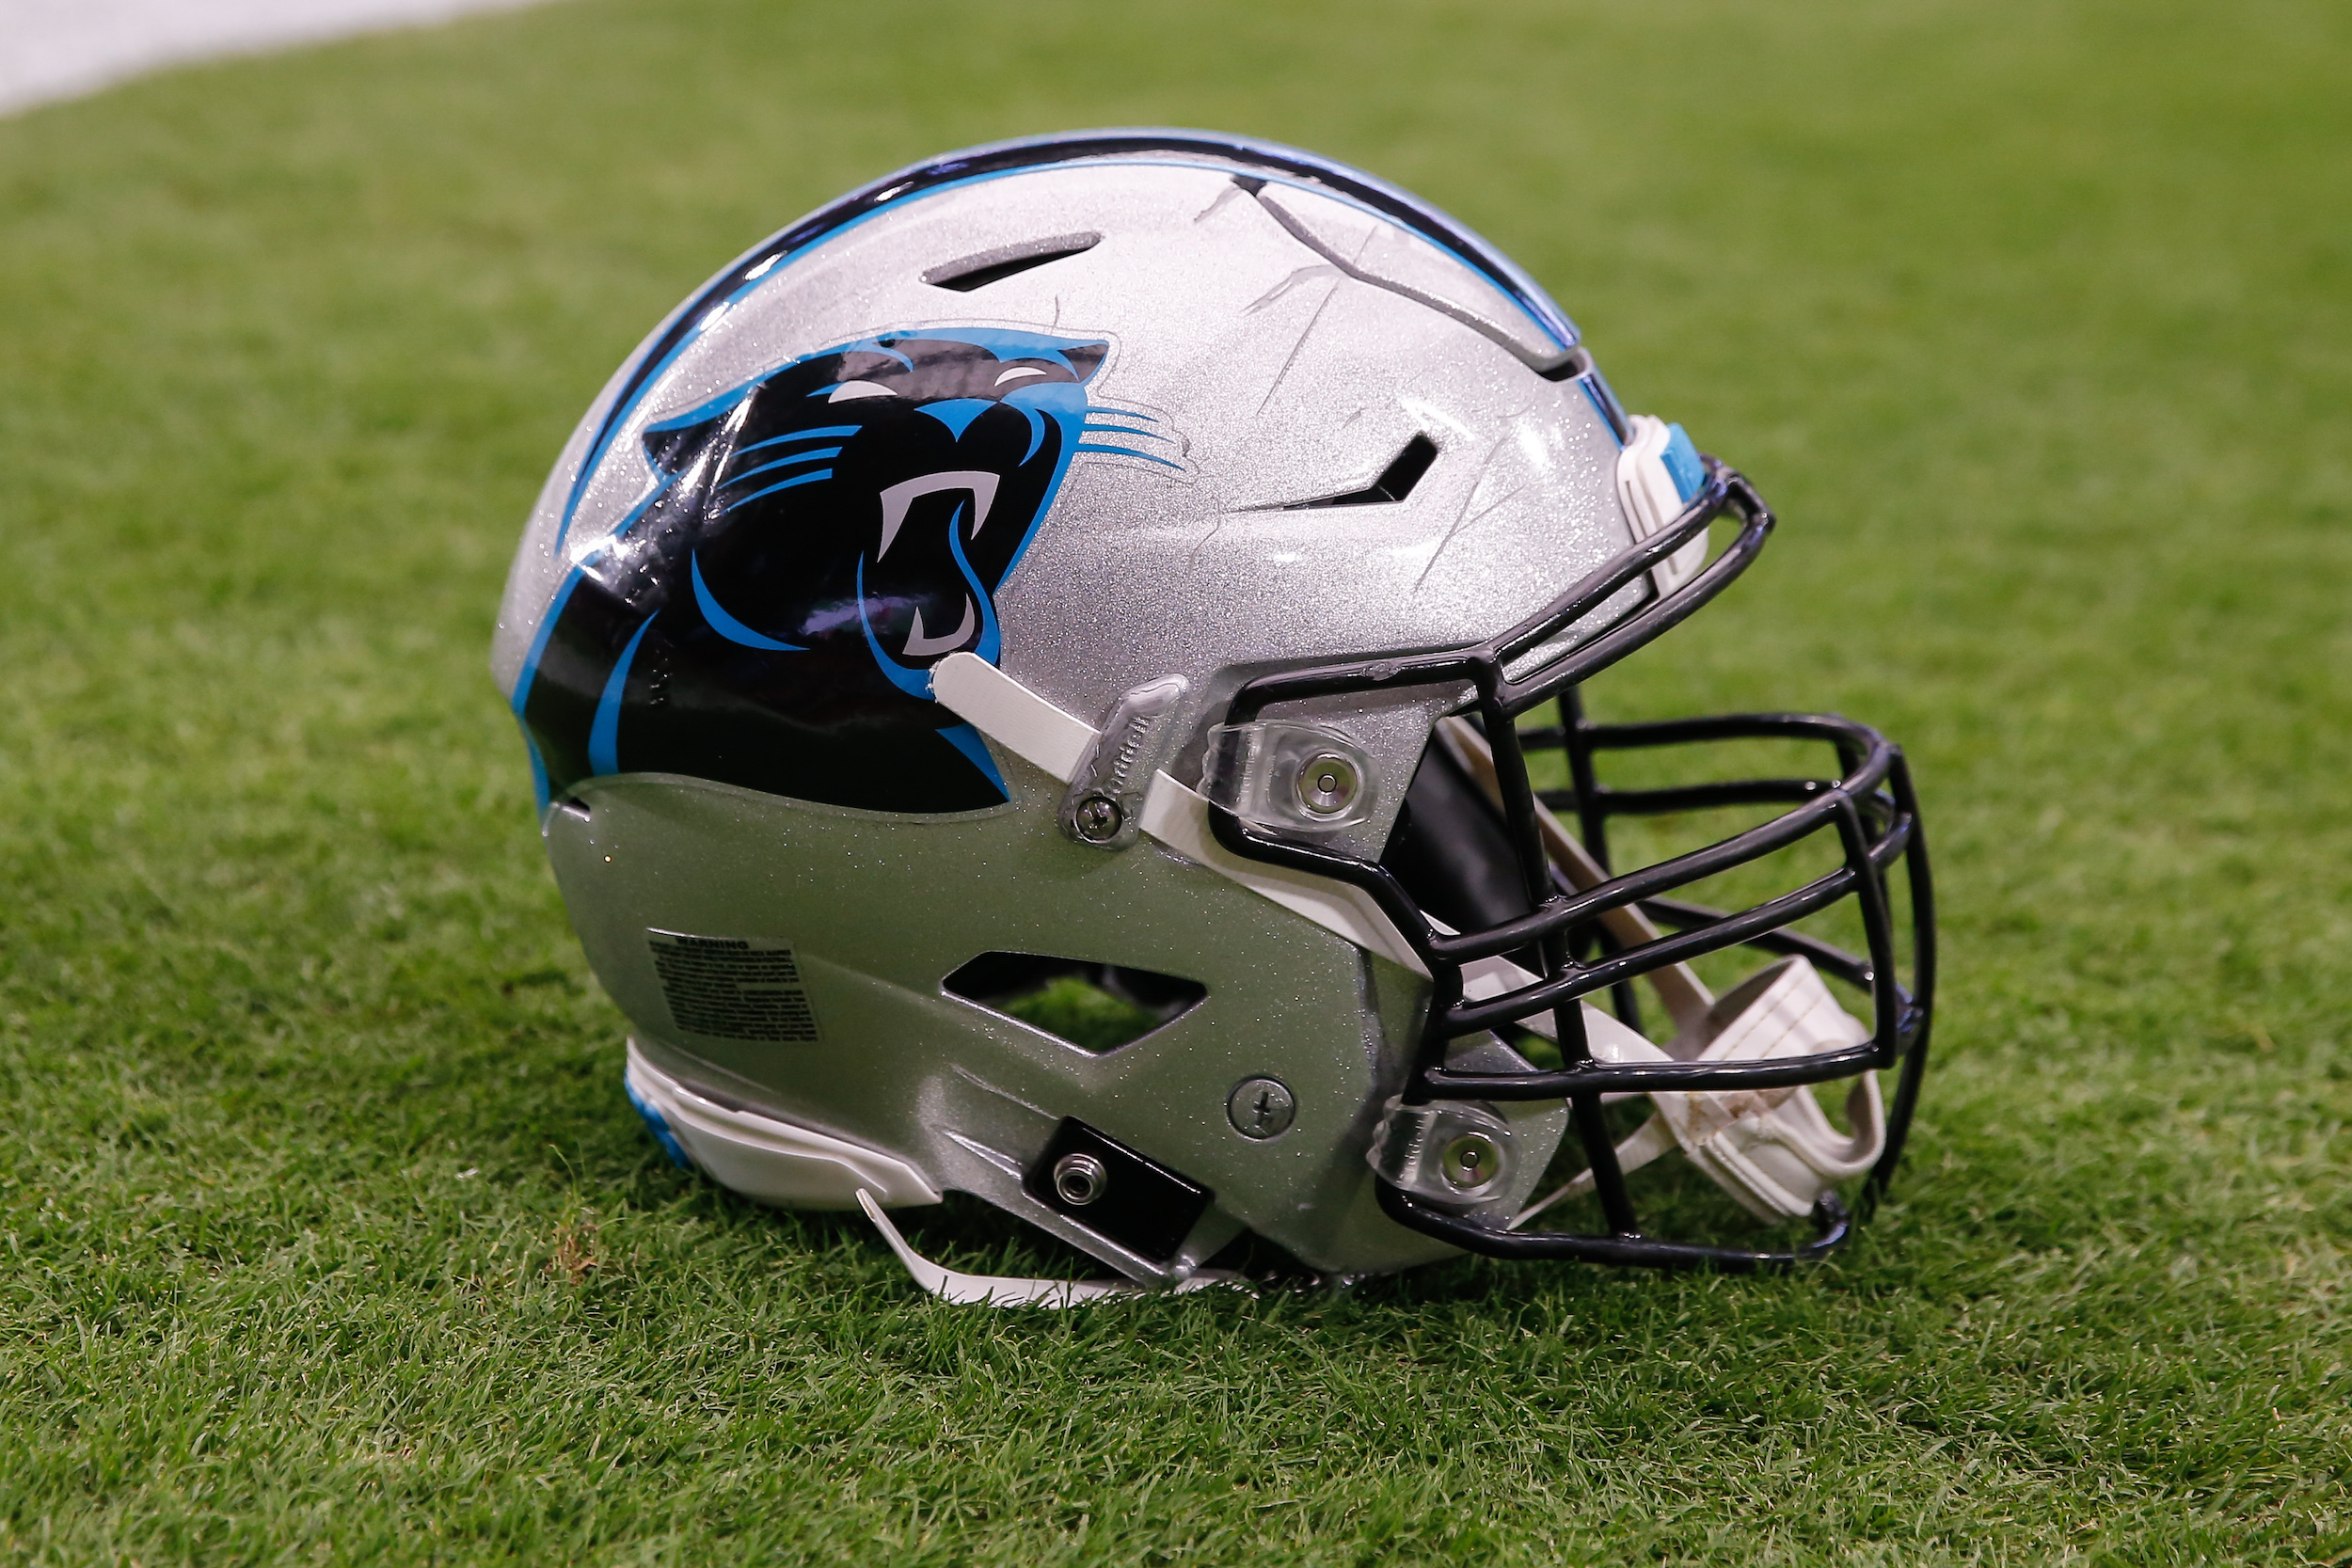 While the 2020 NFL season will be a but unsual for everyone, things will be extra challenging for the Carolina Panthers.